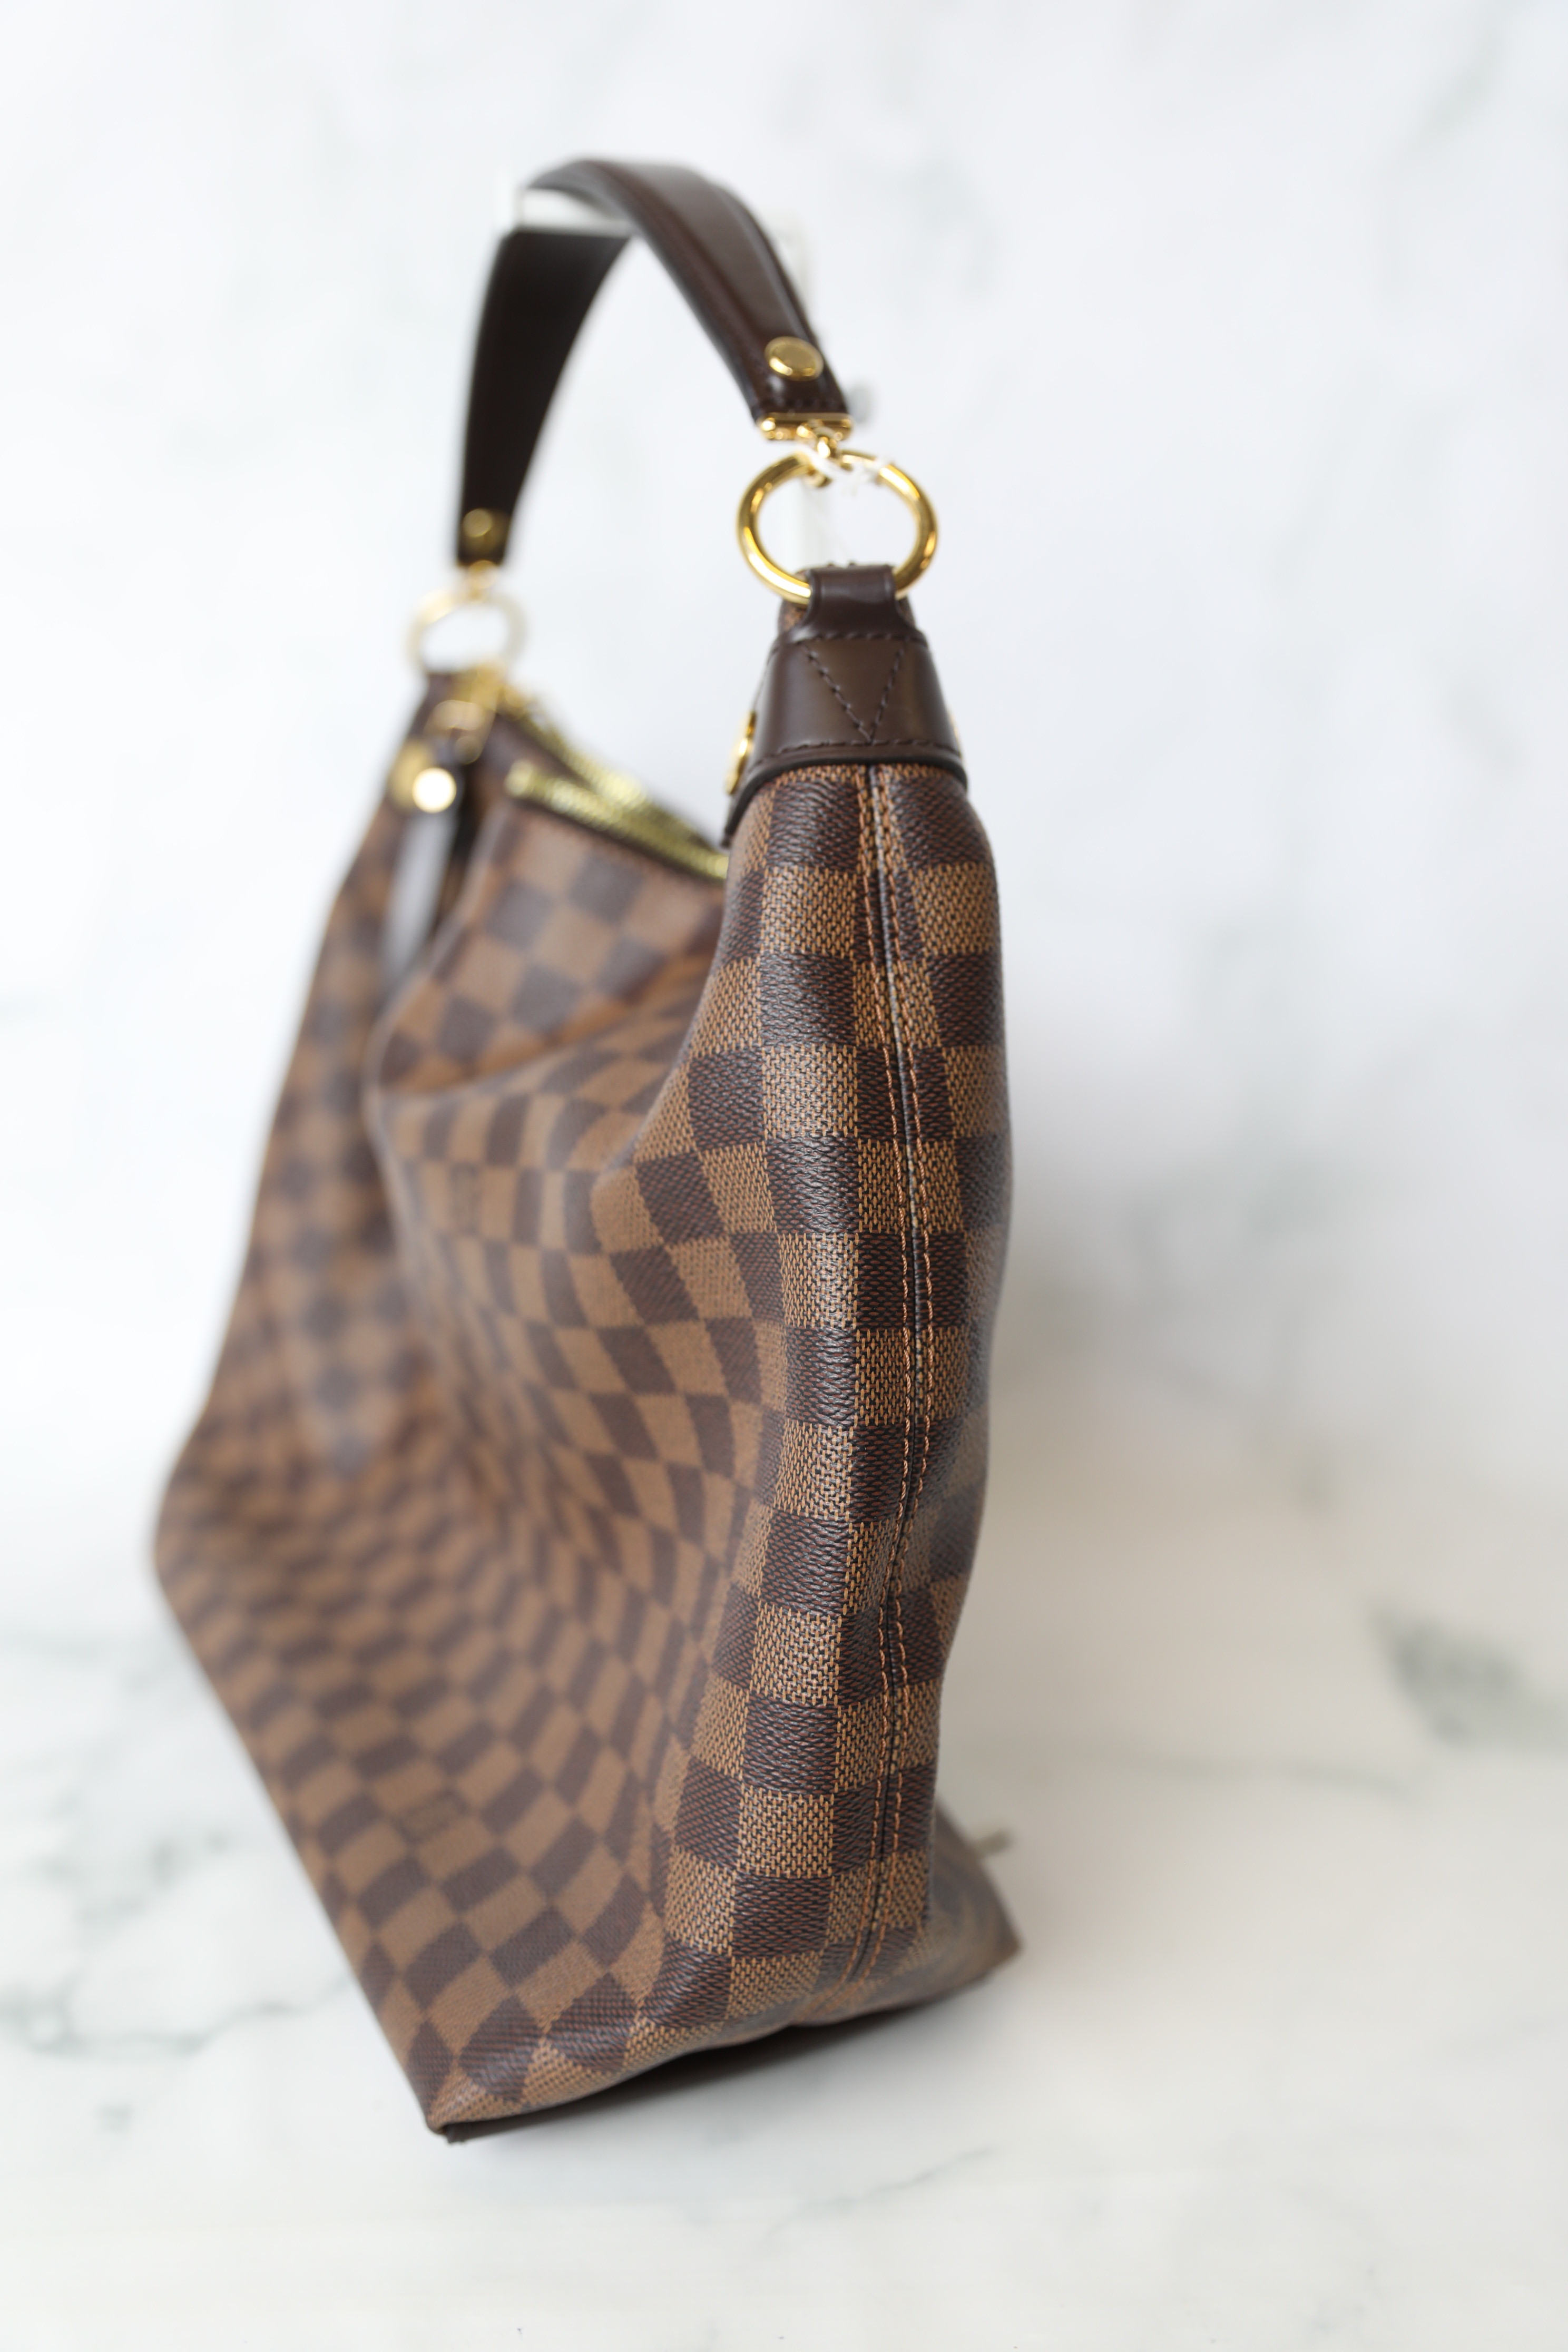 Louis Vuitton Duomo Hobo Damier Ebene ❤BIG SALE P69,800 ONLY❤ Used twice  only .Good as Bnew! Complete with box dustbag cards and paperbag Swipe for  detailed pics Cash/card/layaway accepted, Luxury, Bags 